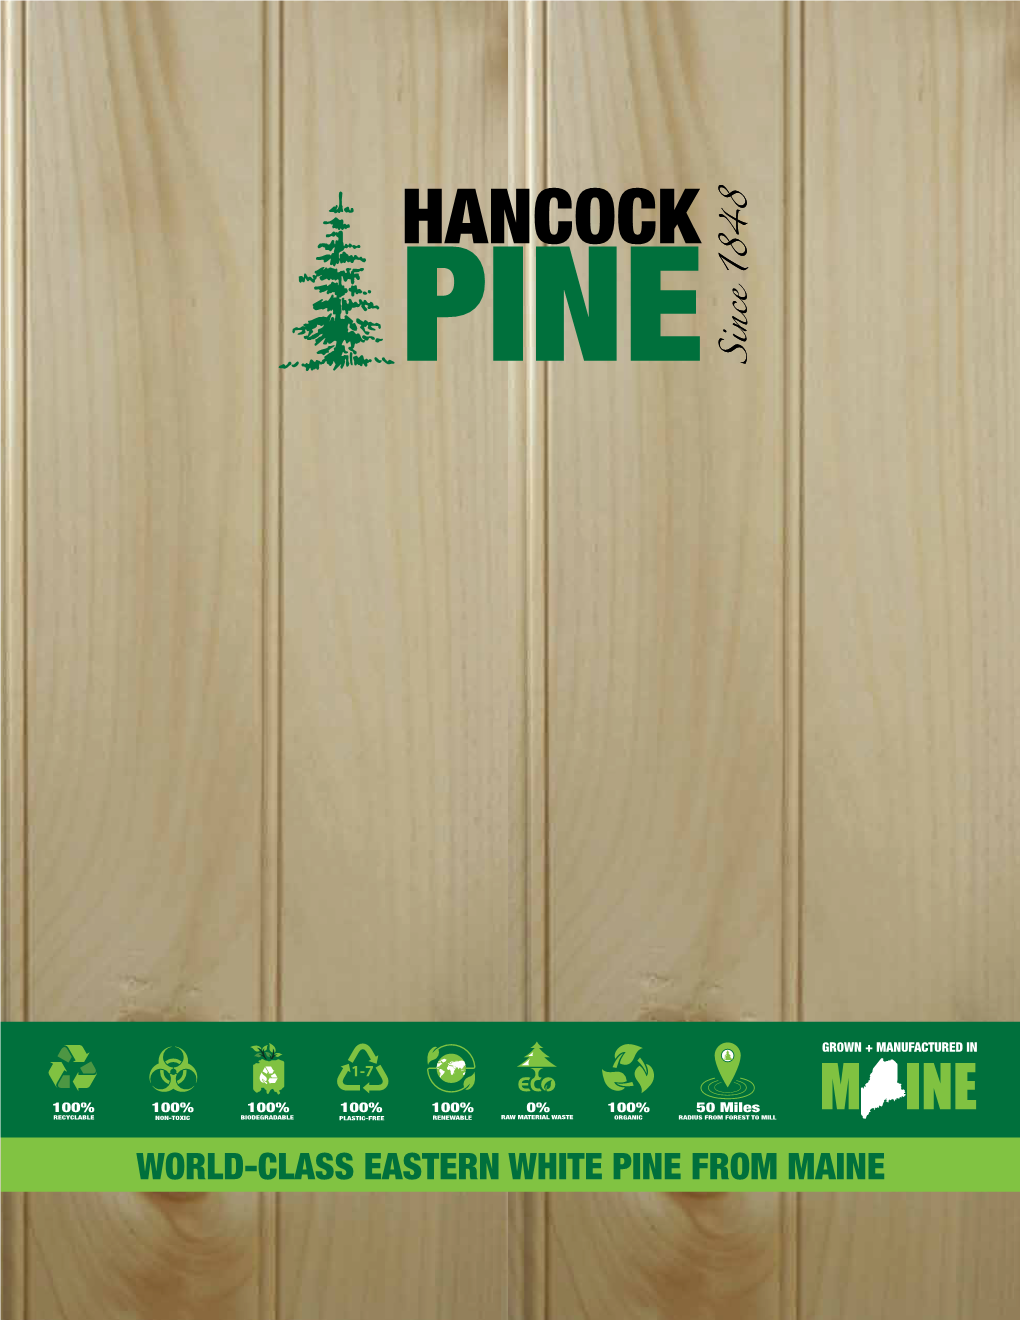 World-Class Eastern White Pine from Maine